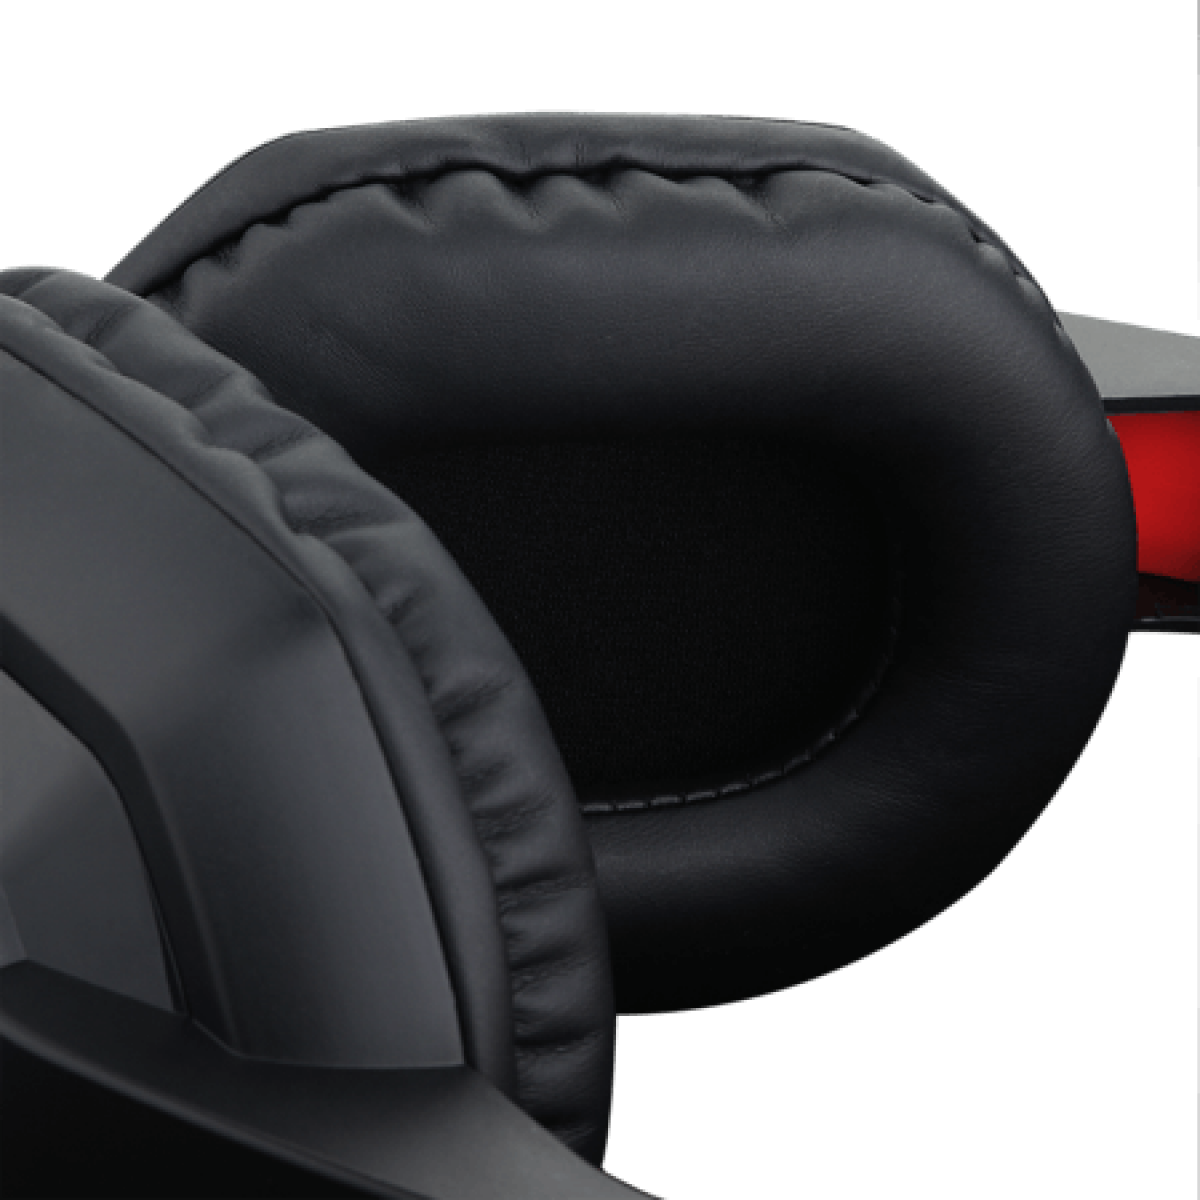 Headset Redragon Ares, Estéreo, H120